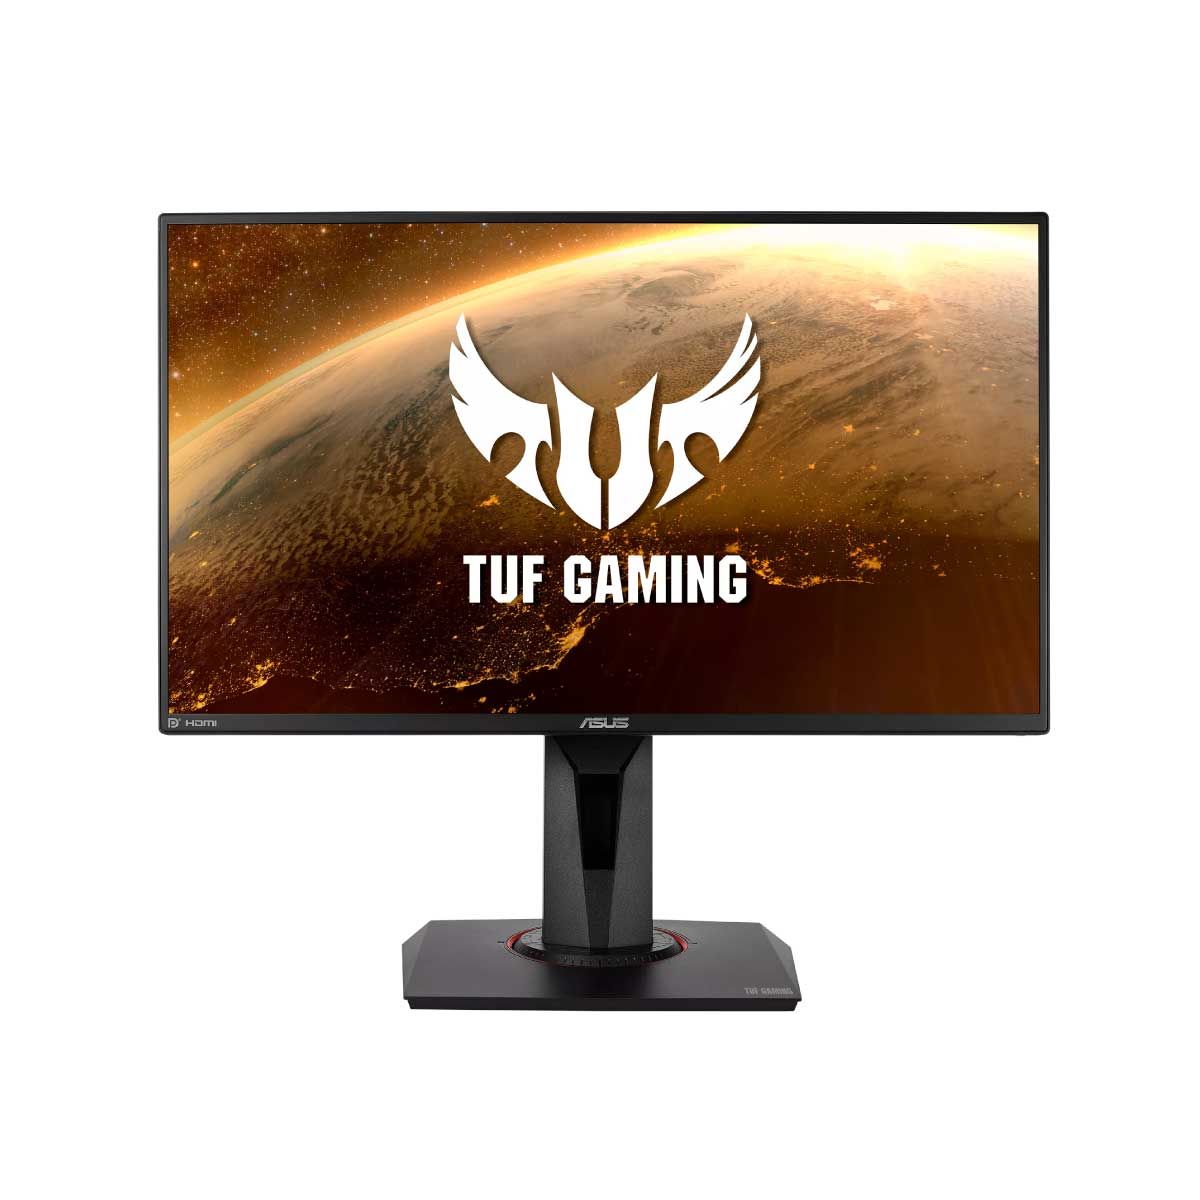 MONITOR (จอมอนิเตอร์) ASUS TUF GAMING VG259QR - 24.5" IPS FHD 165Hz G-SYNC COMPATIBLE